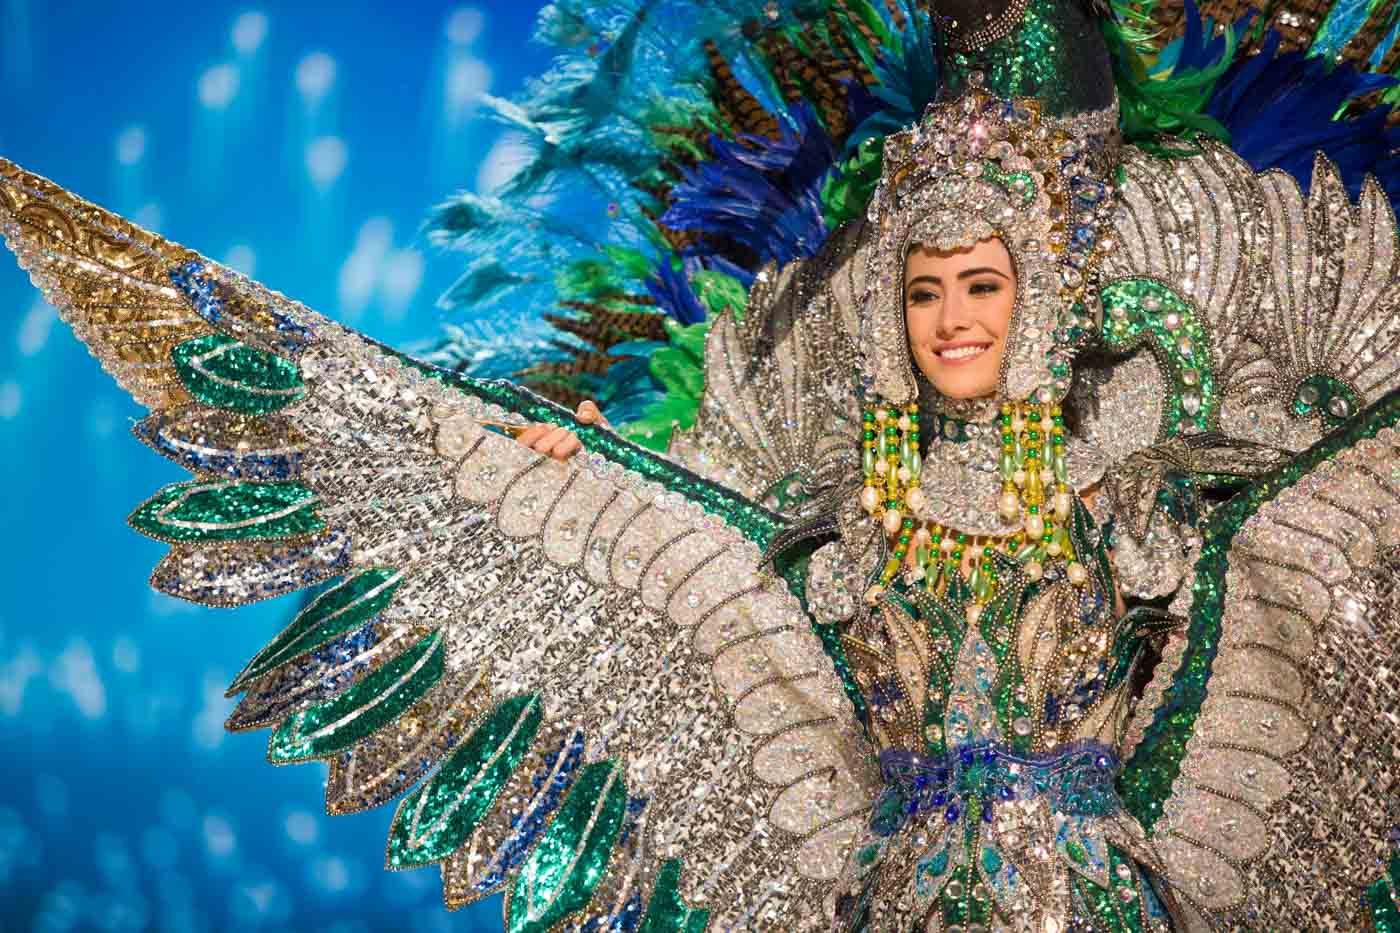 IN PHOTOS: Miss Universe national costumes